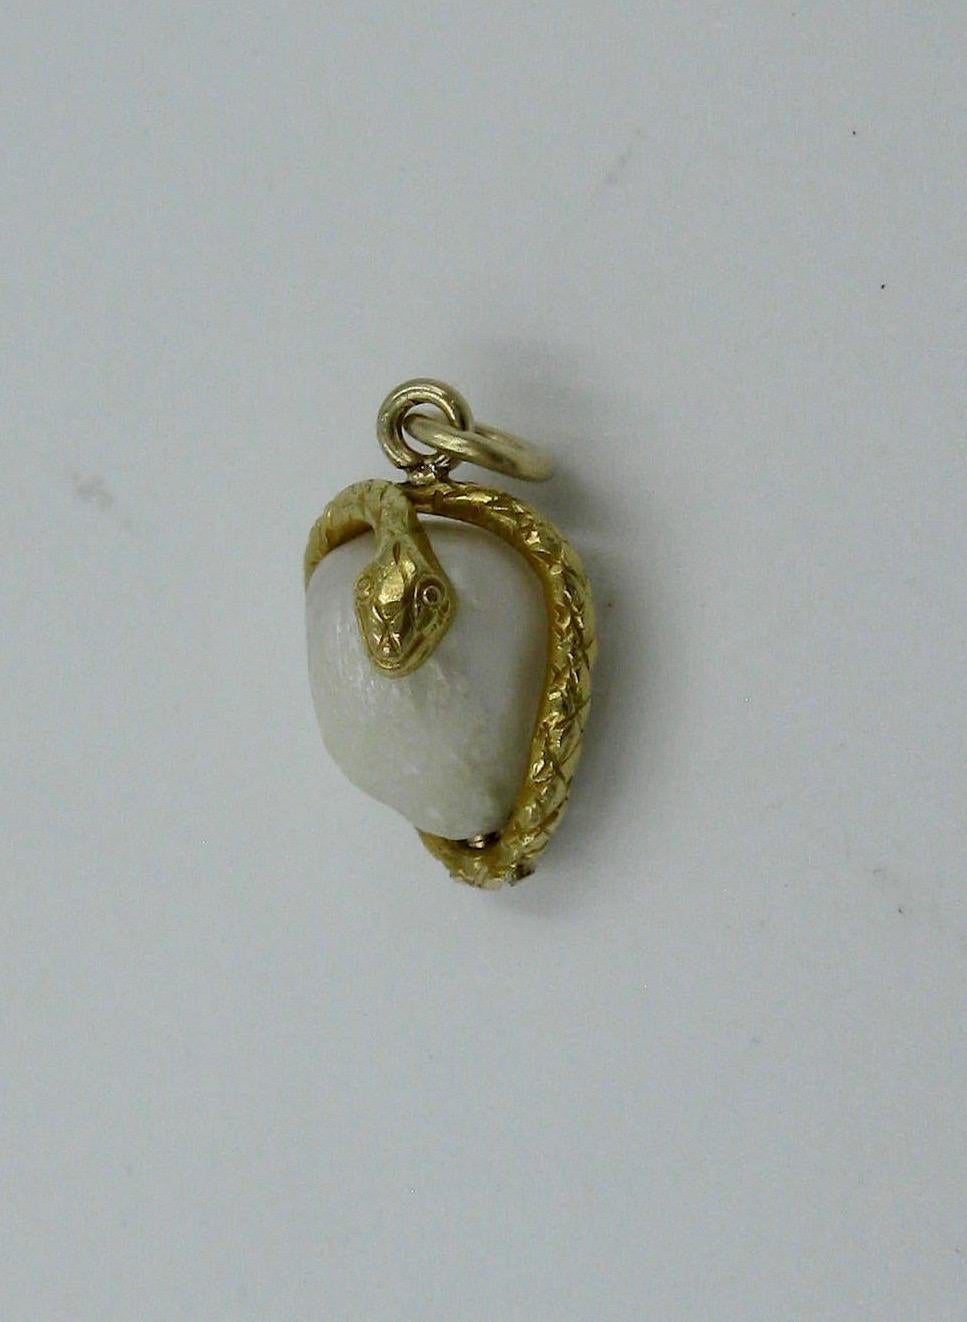 A rare antique Victorian Snake Pendant depicting a snake or serpent wrapped around an egg.  The snake in 14 Karat gold with wonderful engraved details throughout the head, and extending through the tail.  The egg a gorgeous Baroque Pearl. The snake